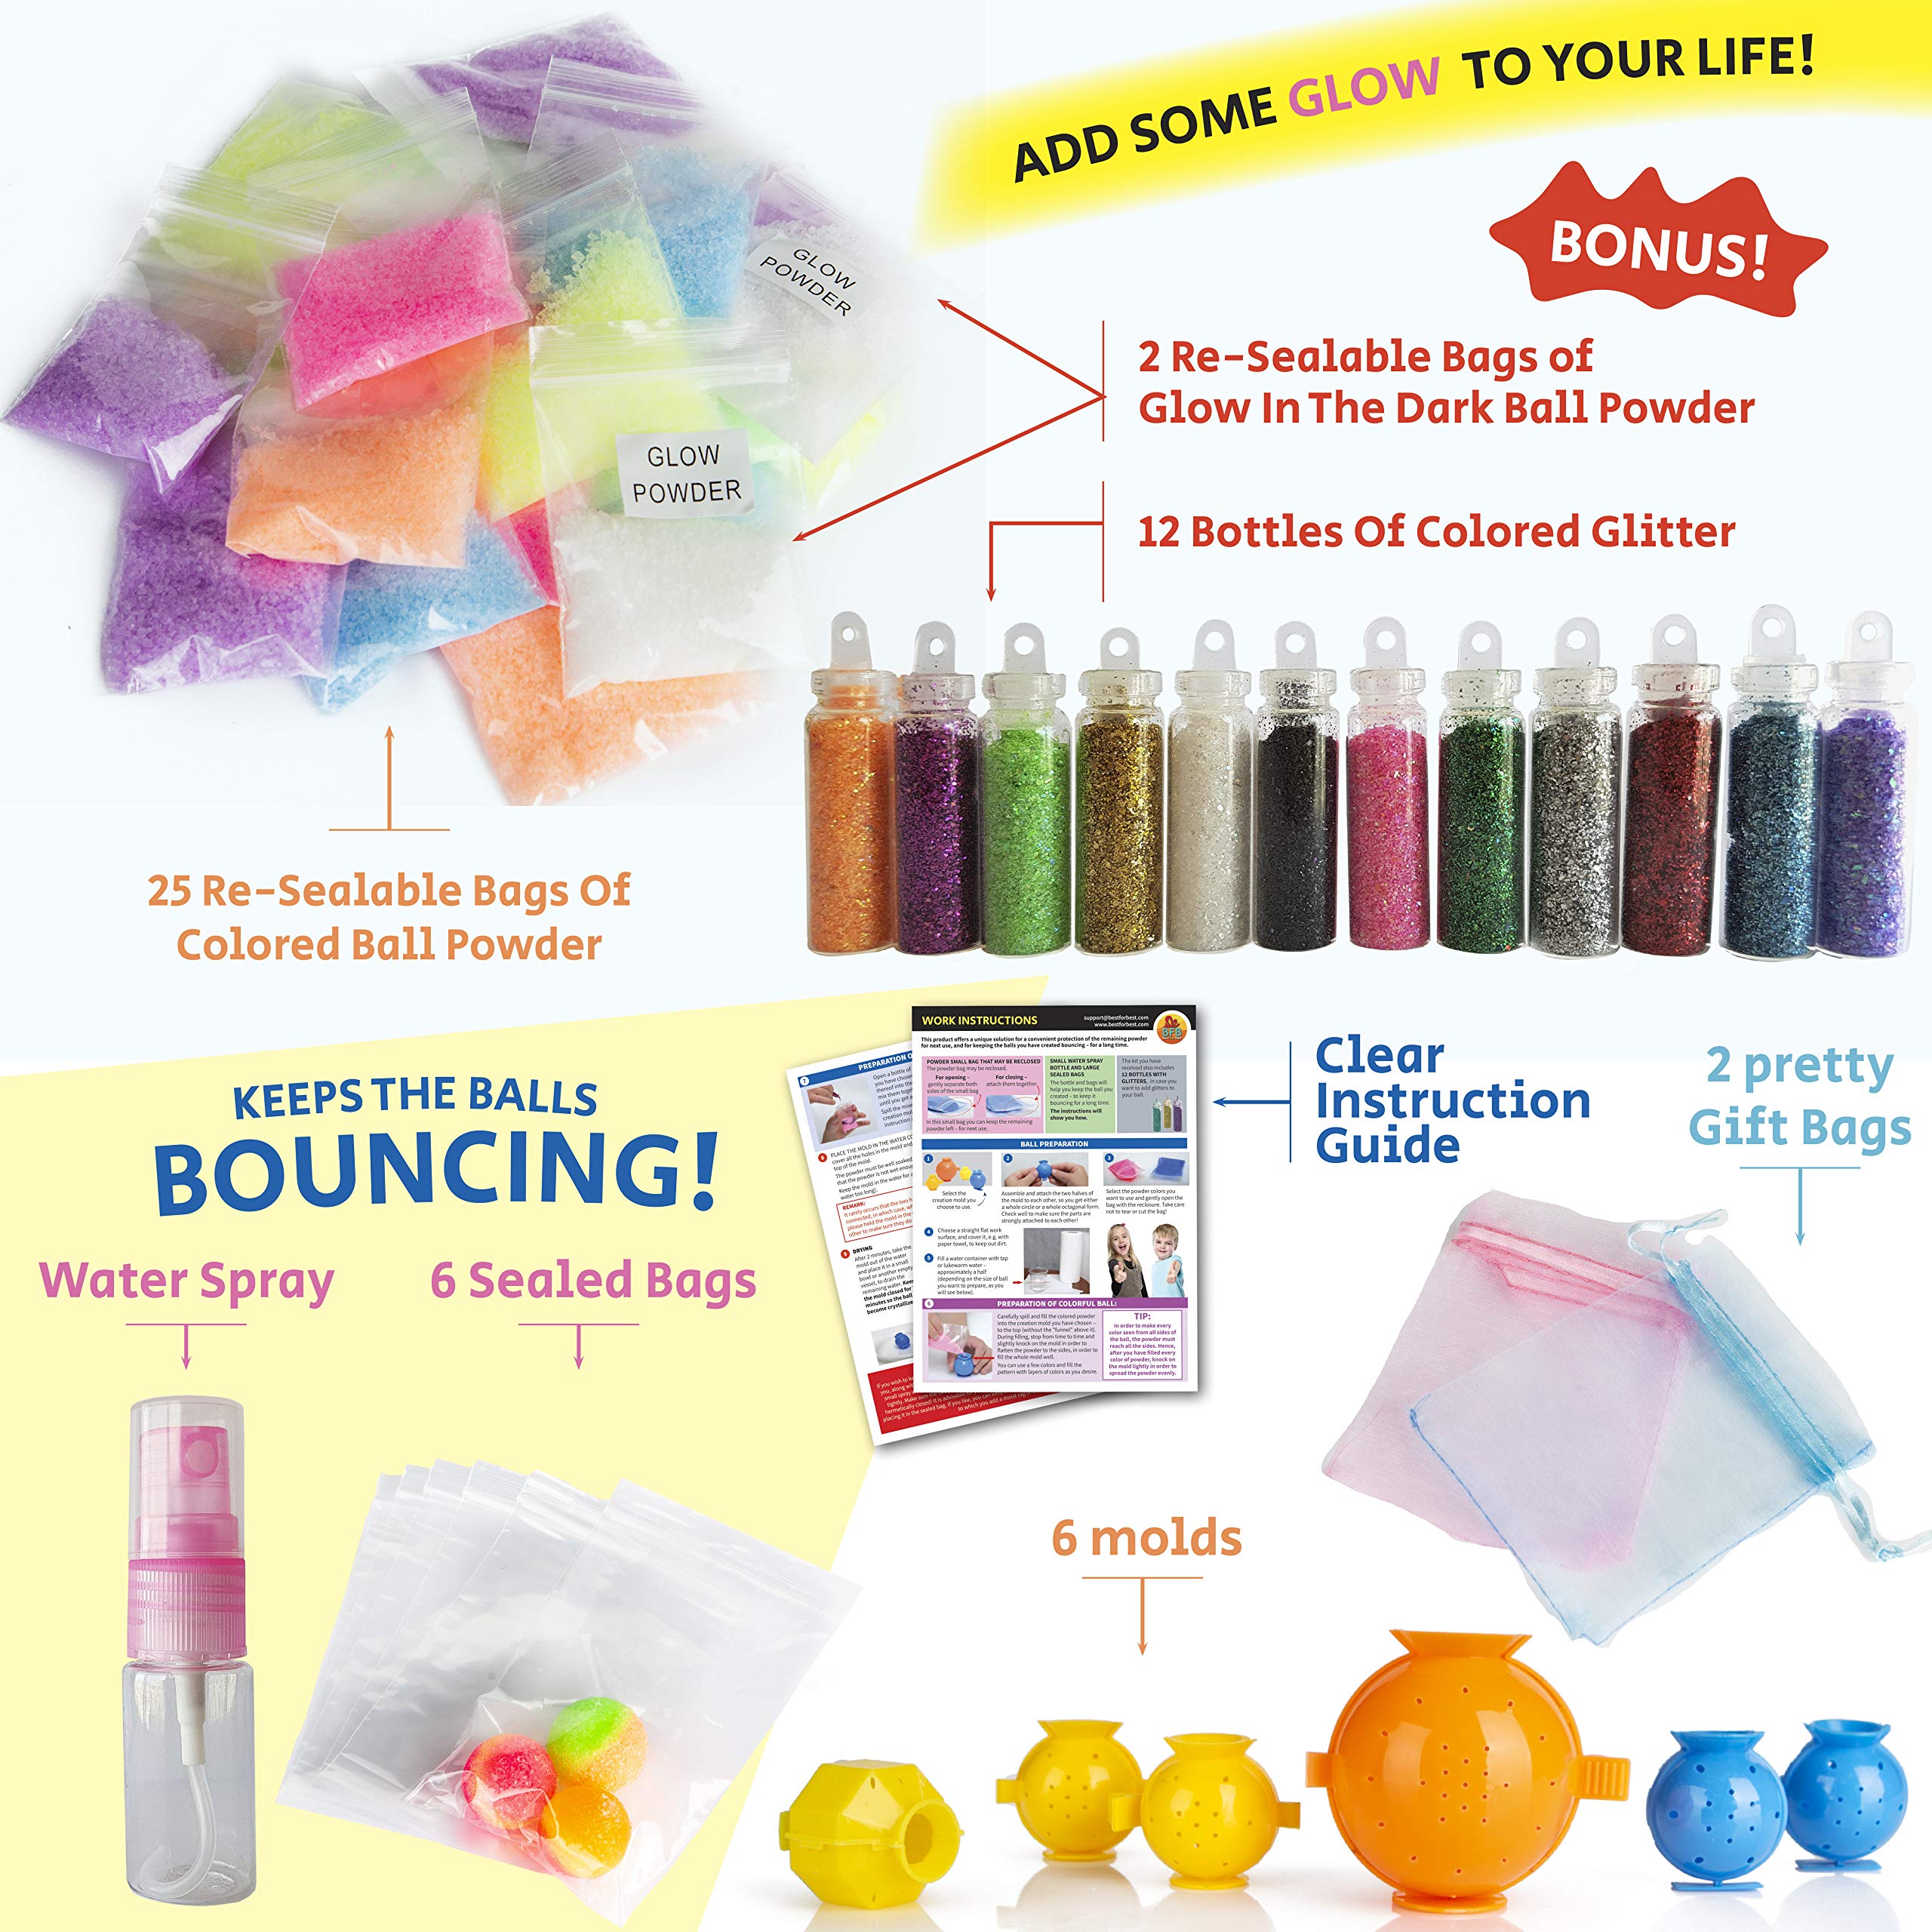 DIY Super Bouncy Balls Kit - Make Your Own Bouncy Balls, Crystal Power Kids Crafts Kits, Multi-Colored Glow in The Dark Powder, Molds, Glitter, Science Experiments for Kids 6-8 9 10 11 12 Years Old